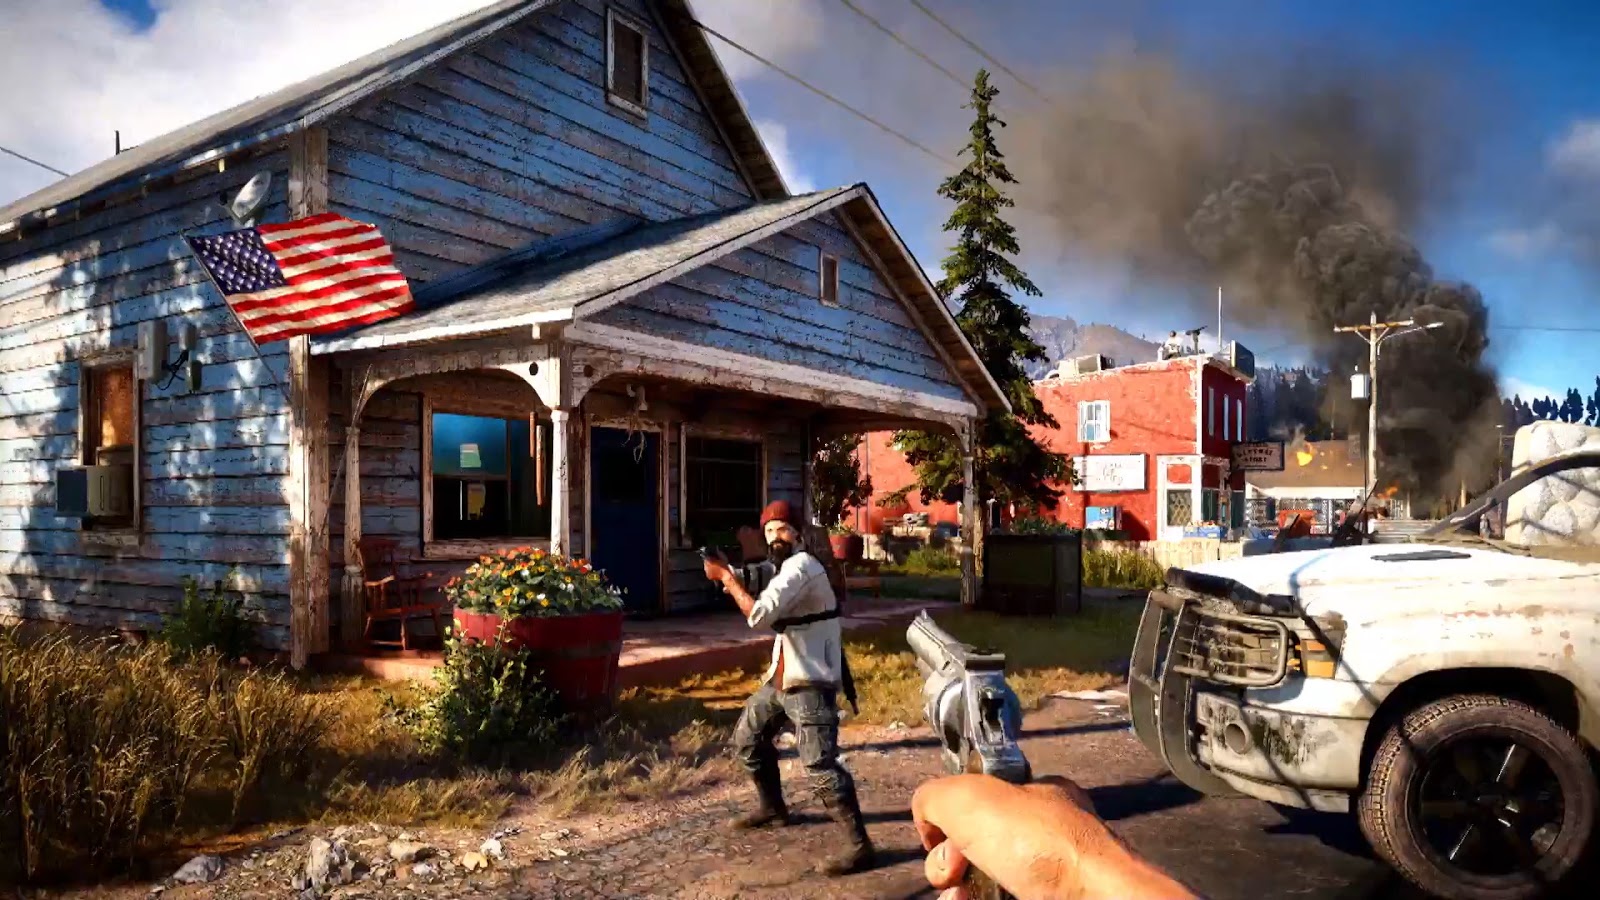 download far cry 5 cracked